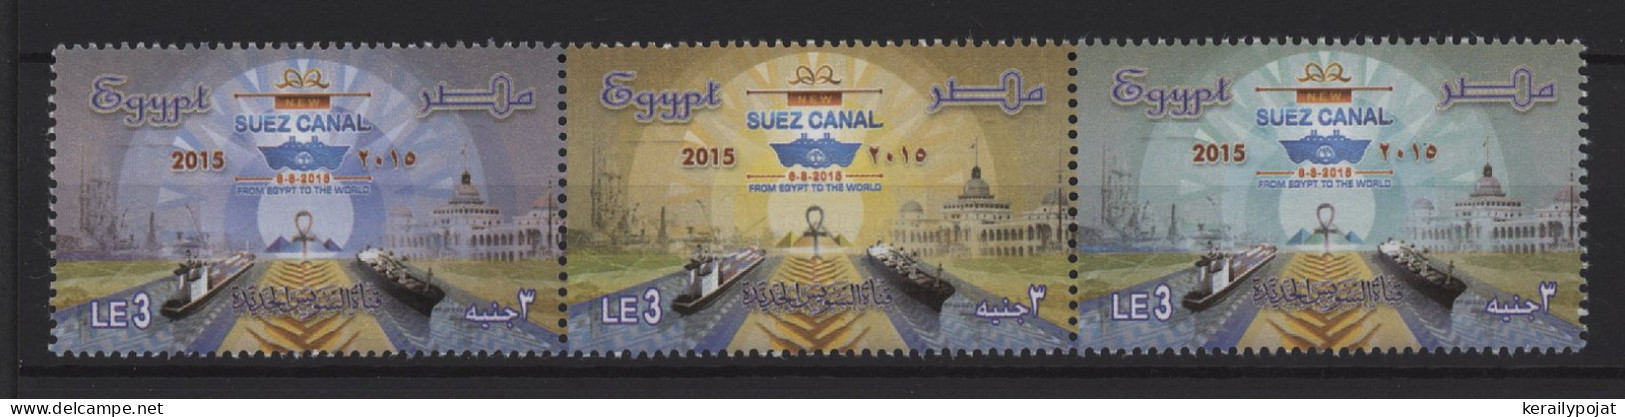 Egypt - 2015 New Suez Canal Strip MNH__(TH-26046) - Unused Stamps